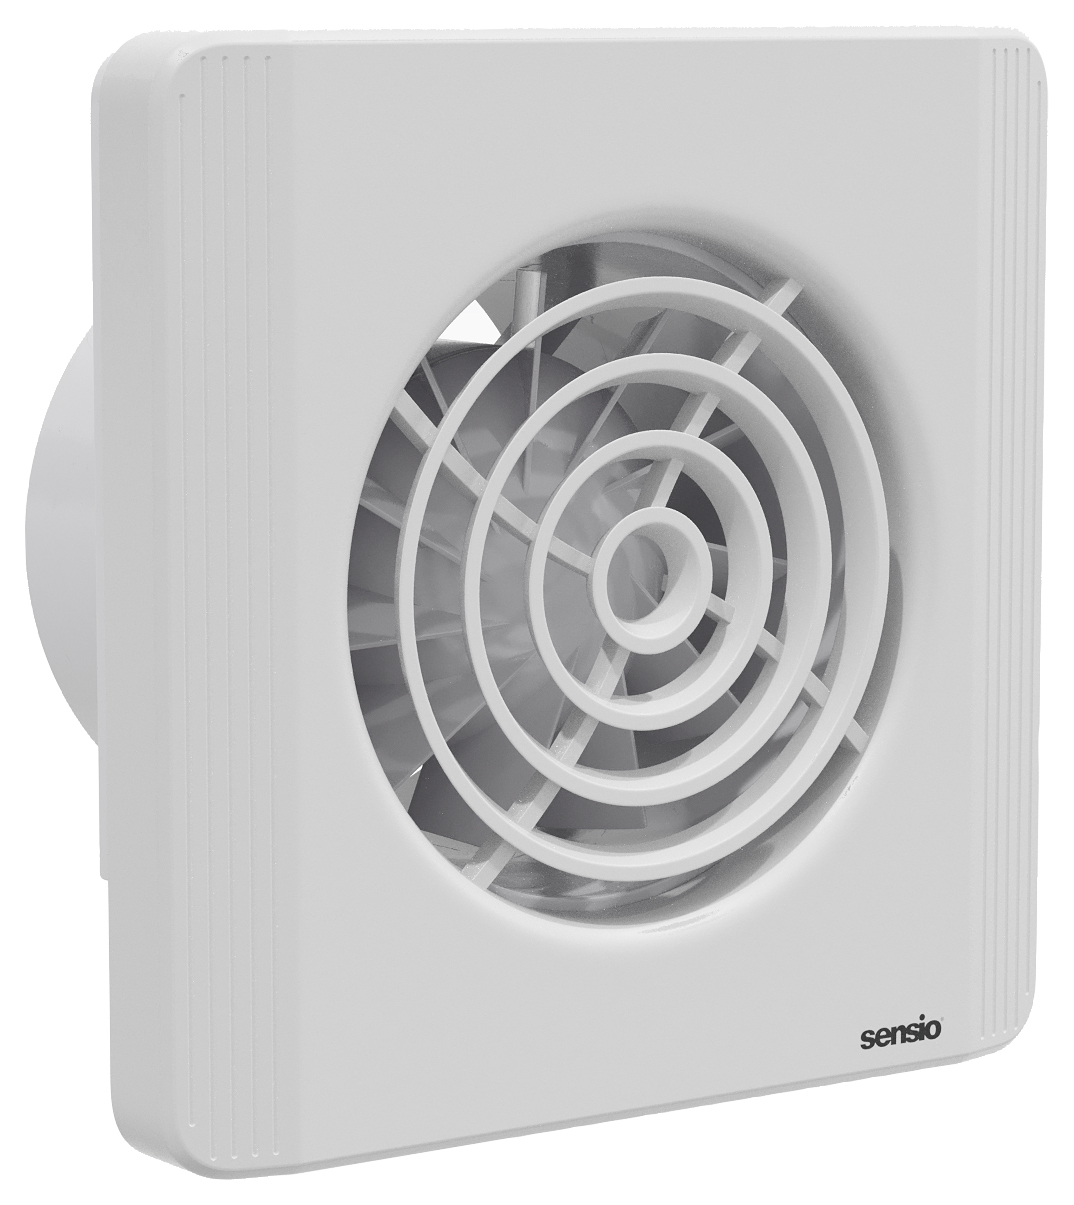 Image of Sensio Layci White Wall Ventilation Fan with Aquilo Ventilation Ducting Kit - ø100mm